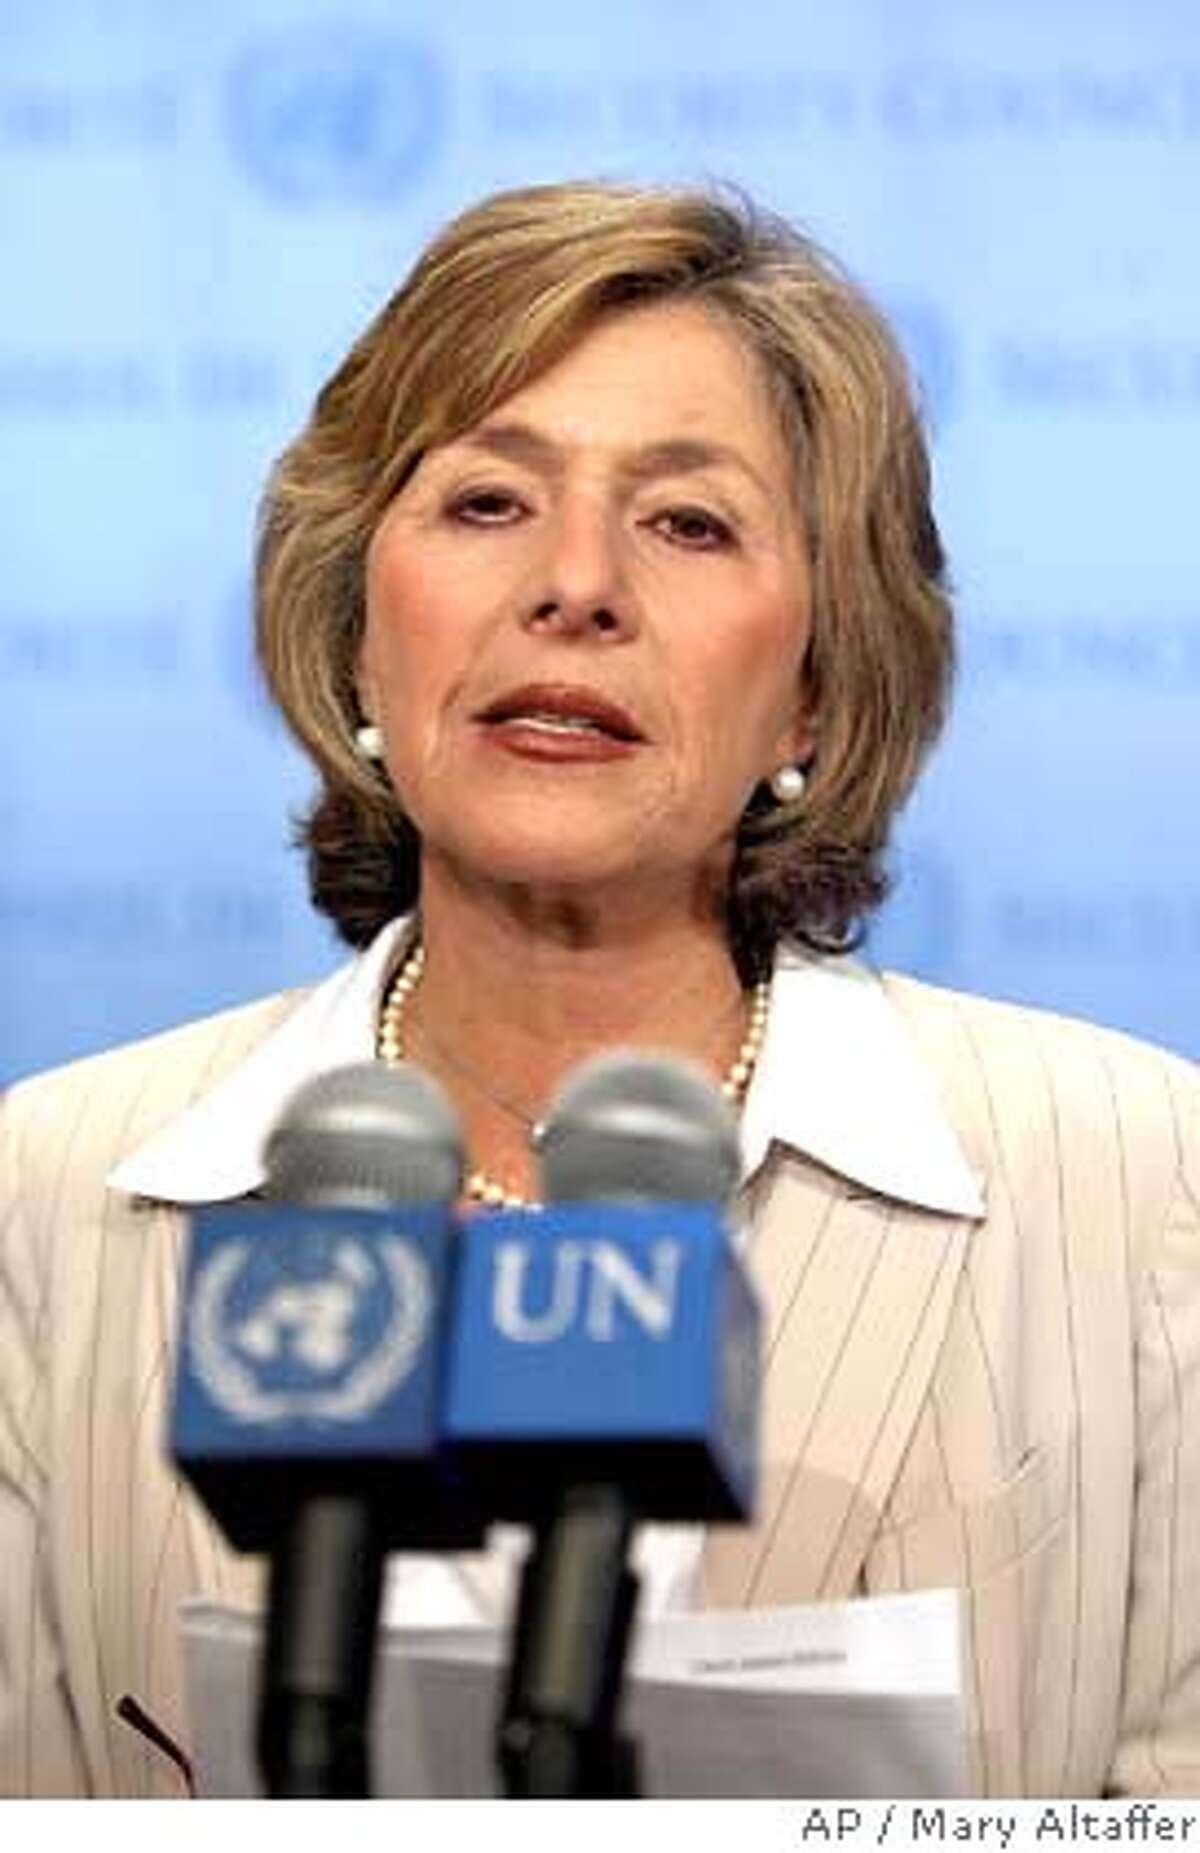 Sen. Barbara Boxer, D-Calif, addresses members of the media about the situation in Darfur at United Nations headquarters, Monday, Sept. 18, 2006. (AP Photo/Mary Altaffer) Ran on: 09-27-2006 Sen. Barbara Boxer says paper ballots could assuage fraud fears and provide a backup for machines. Ran on: 09-27-2006 Ran on: 01-13-2007 Barbara Boxer: You're not going to pay a price {hellip} within immediate family. Ran on: 01-13-2007 Barbara Boxer: You're not going to pay a price {hellip} within immediate family. Ran on: 03-02-2007 Sen. Barbara Boxer invited state Sen. Don Perata and other legislators from around the nation to speak to Congress. Ran on: 03-02-2007 Sen. Barbara Boxer invited state Sen. Don Perata and other legislators from around the nation to speak to Congress. Ran on: 03-02-2007 Sen. Barbara Boxer invited state Sen. Don Perata and other legislators from around the nation to speak to Congress. ALSO Ran on: 05-03-2007 Sen. Barbara Boxer